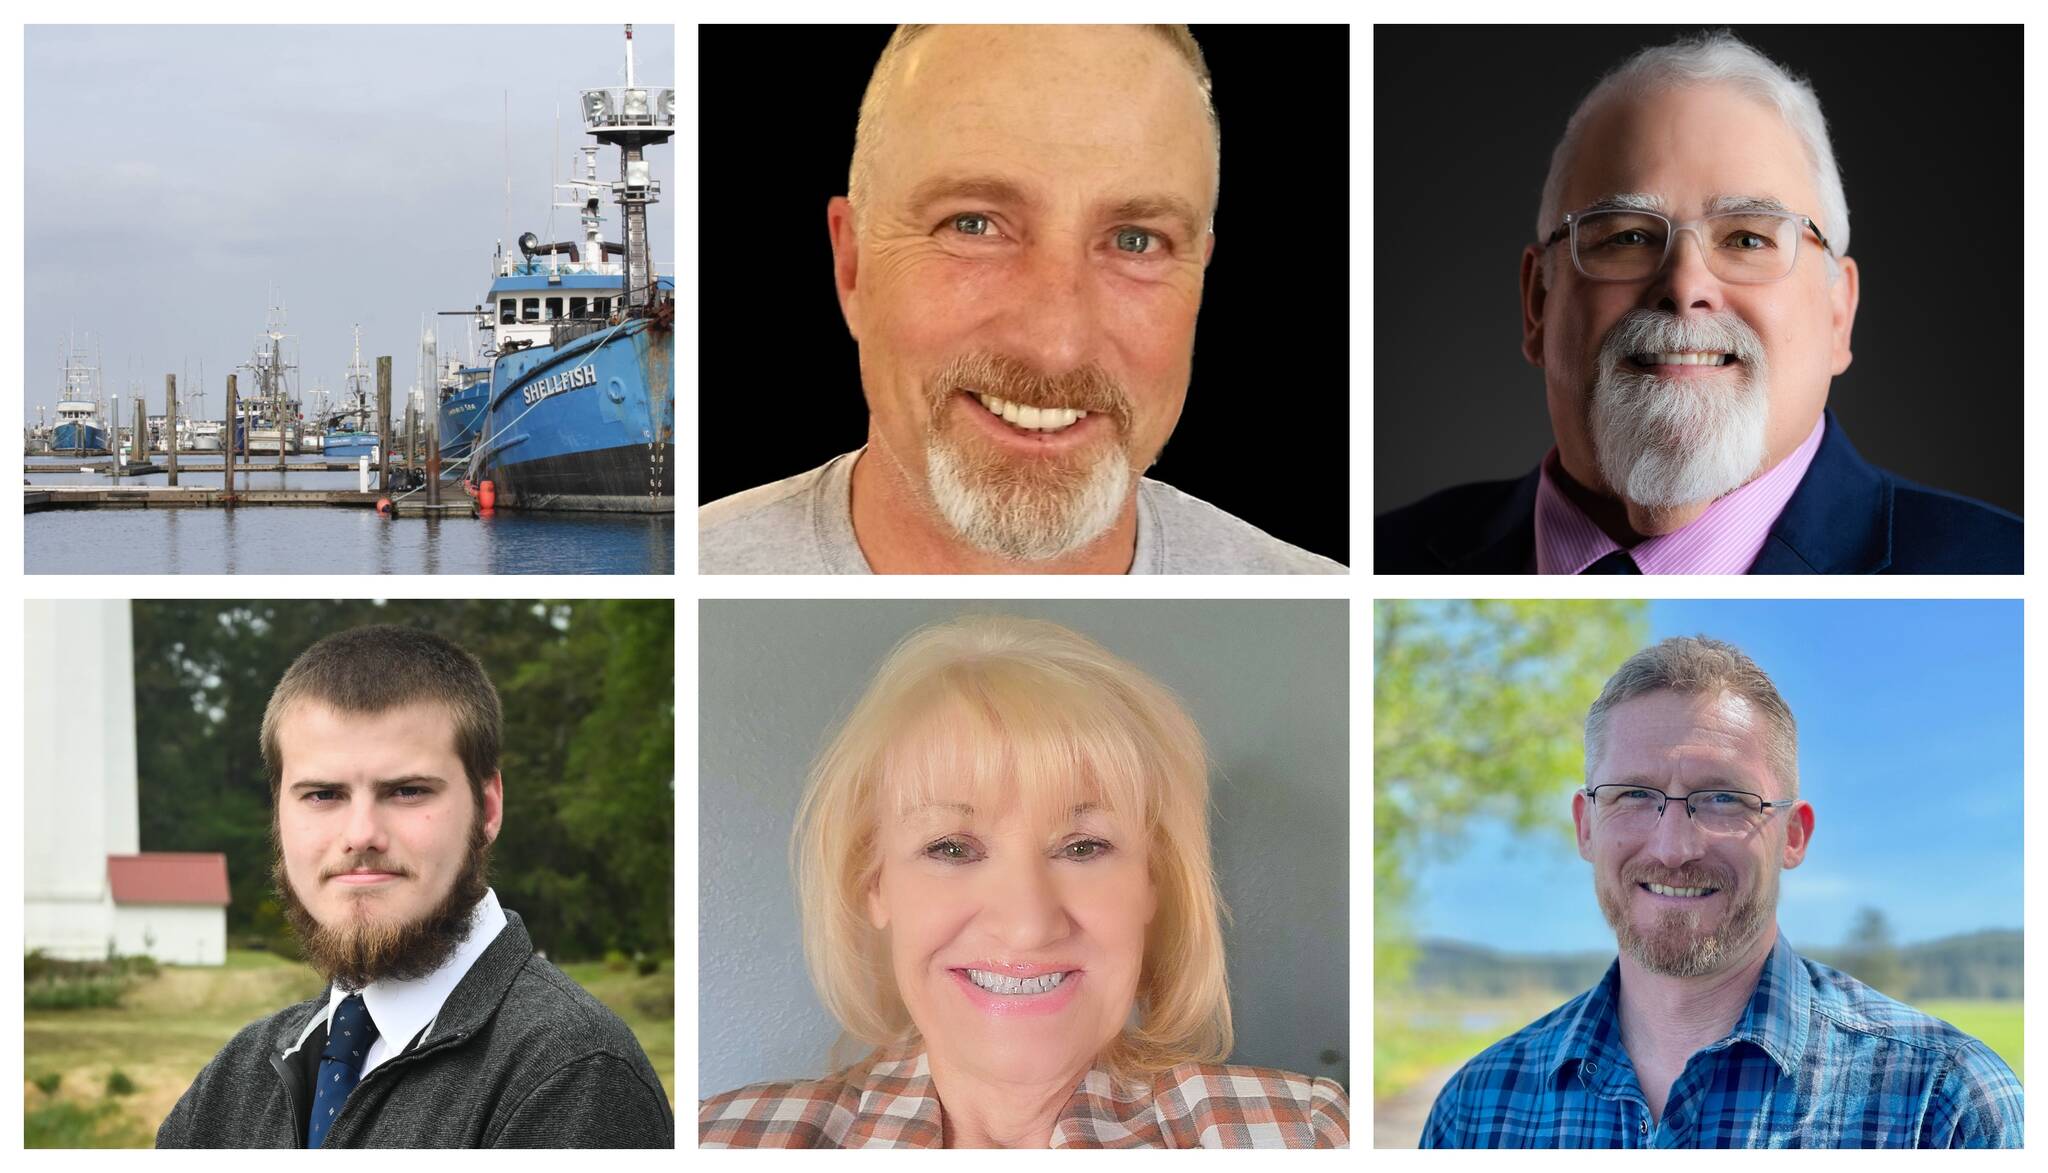 Westport has five candidates registered in the primaries for the mayor’s seat in 2023. They are, pictured at top left going clockwise, Greg Barnes, Michael Bruce, Edward Welter, Rose Jensen and Brennan Jarnes. (Michael S. Lockett / The Daily World)